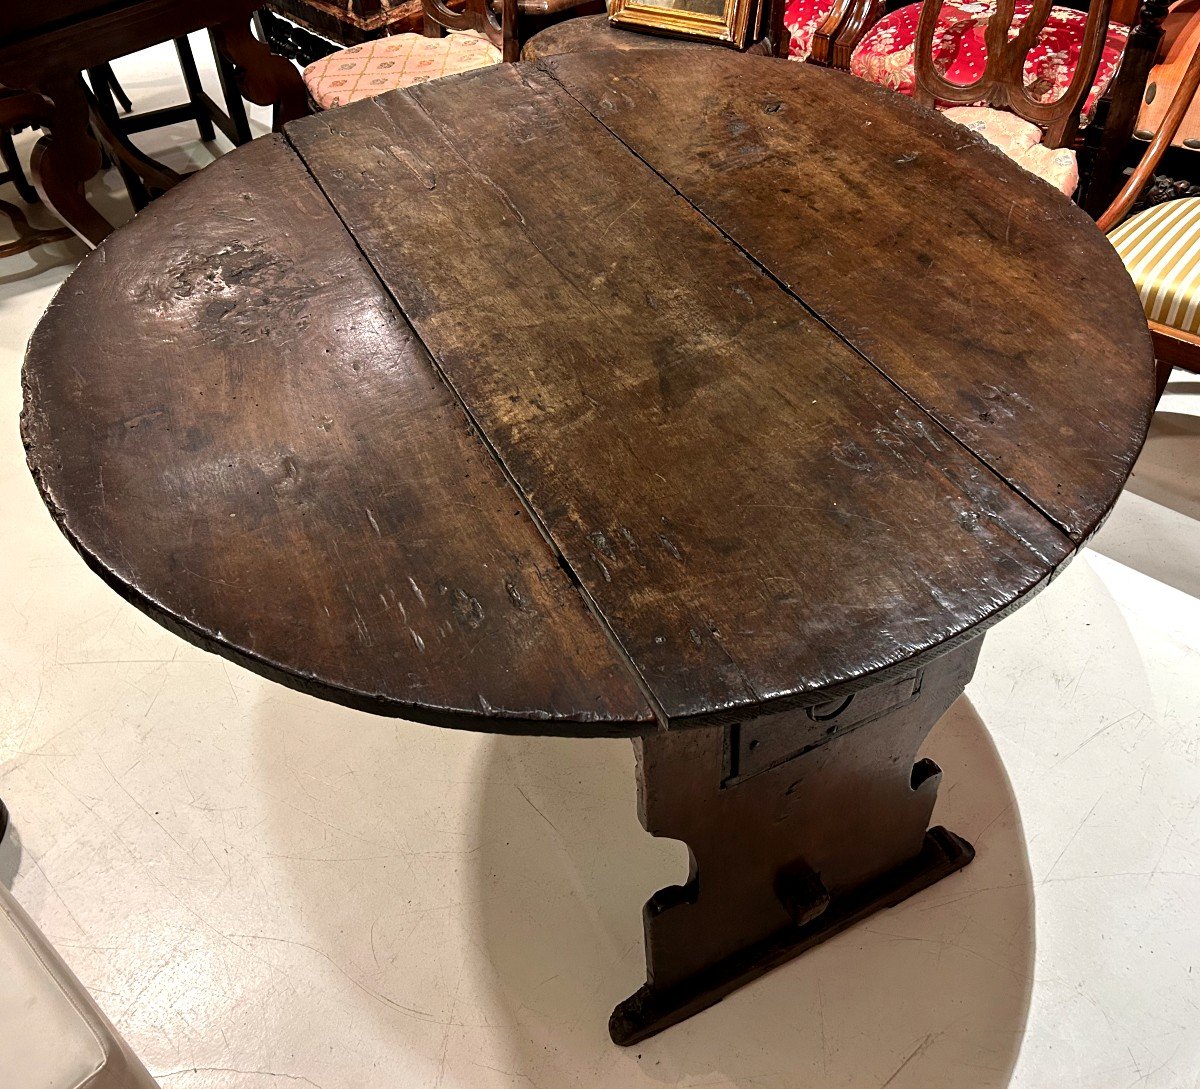 Antique Umbrian Walnut Wood Table From The 16th Century-photo-4